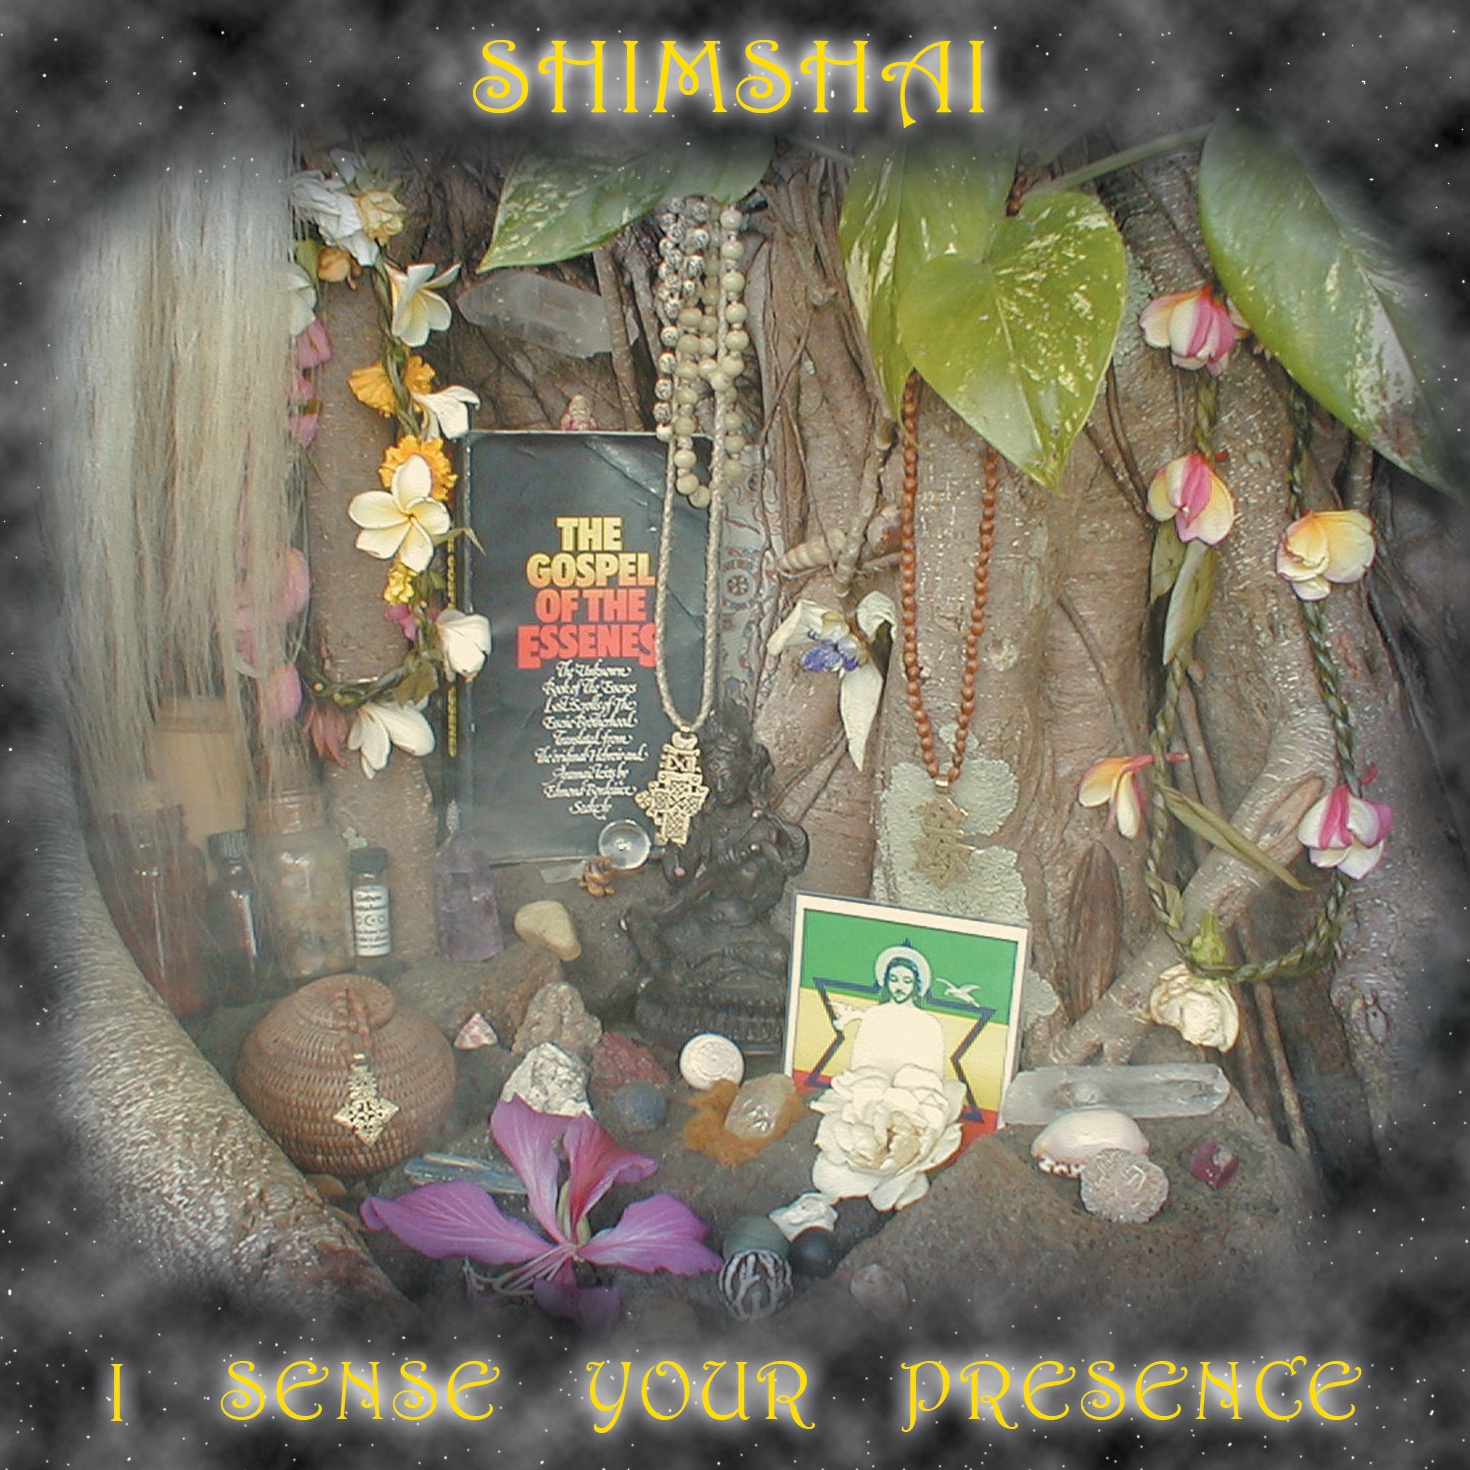 Destination of Creation by Shimshai from the album I Sense Your Presence, original roots reggae music with a deep spiritual message